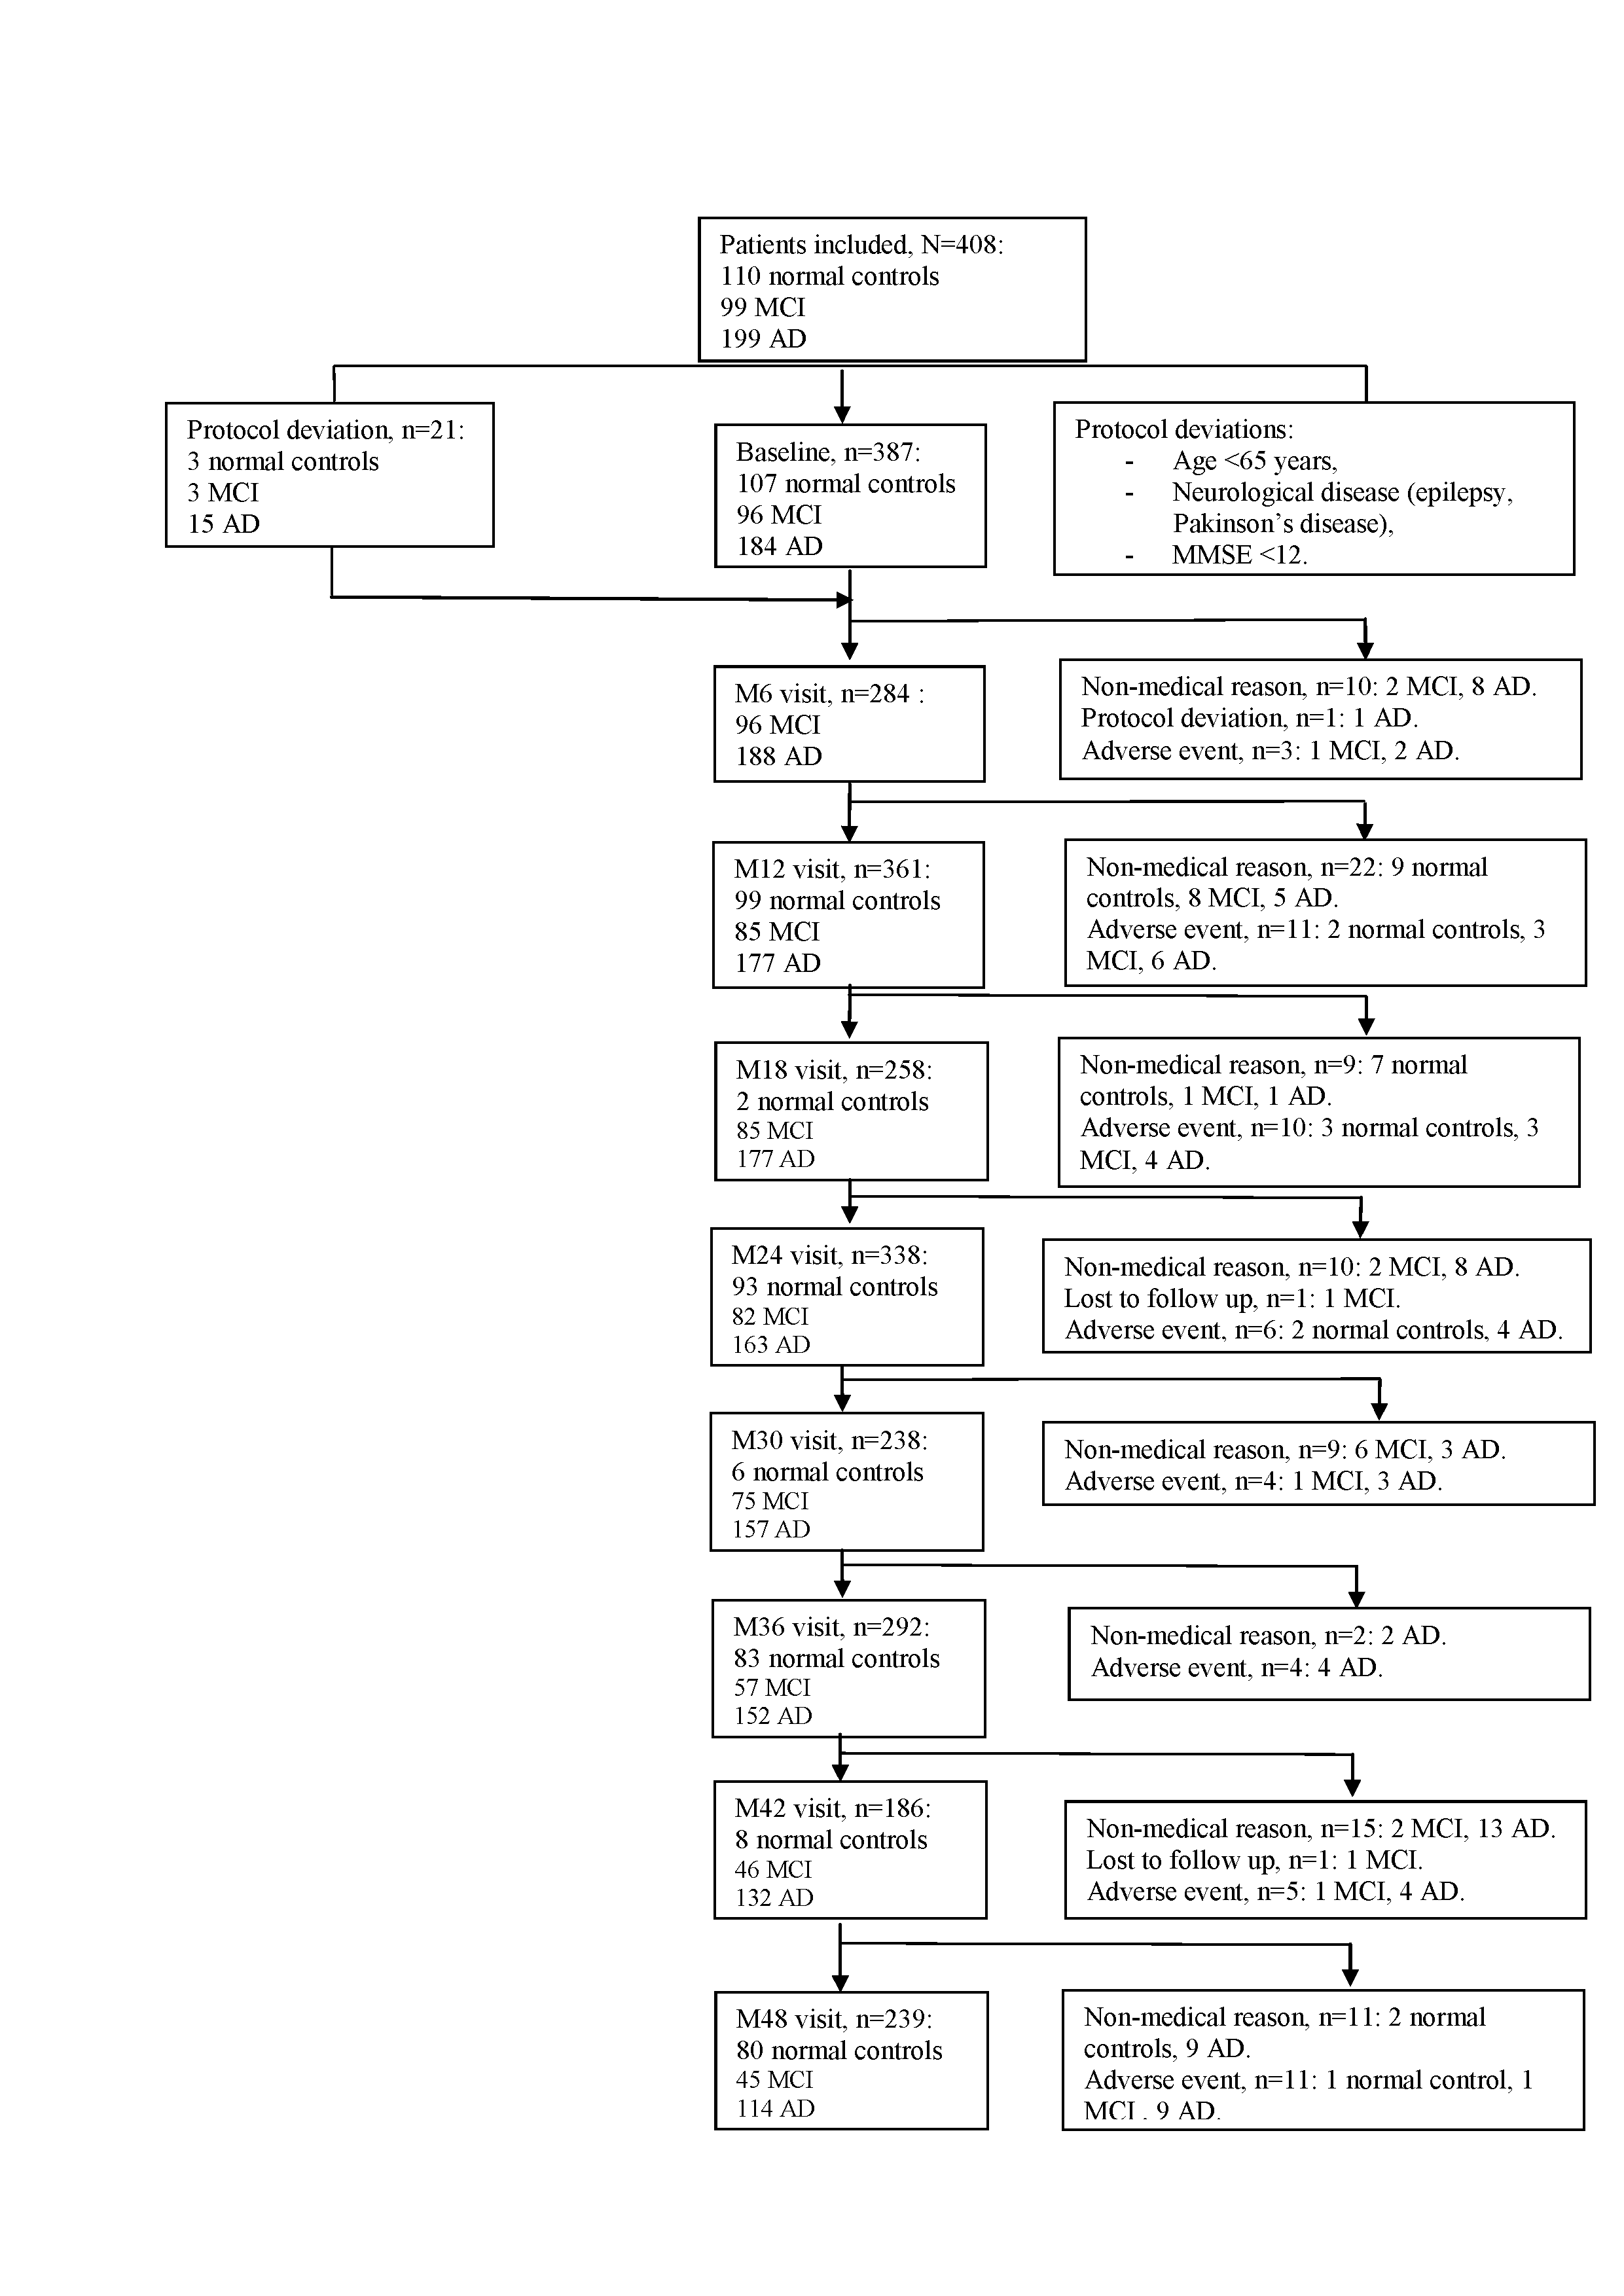 Figure 1. Flow chart of the ROSAS study